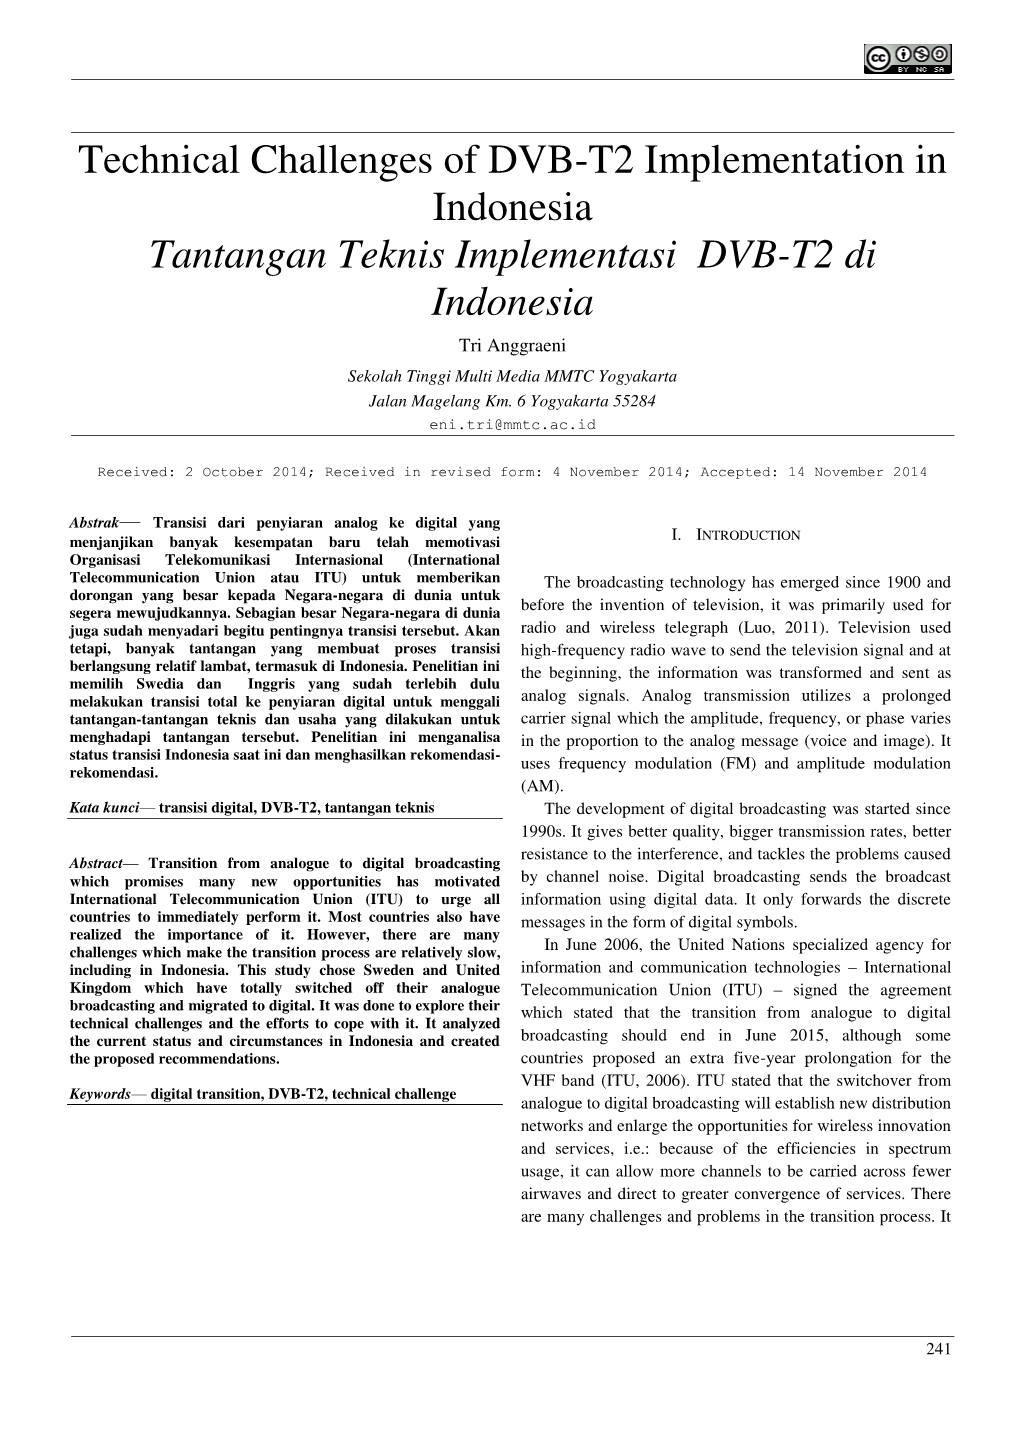 Technical Challenges of DVB-T2 Implementation in Indonesia